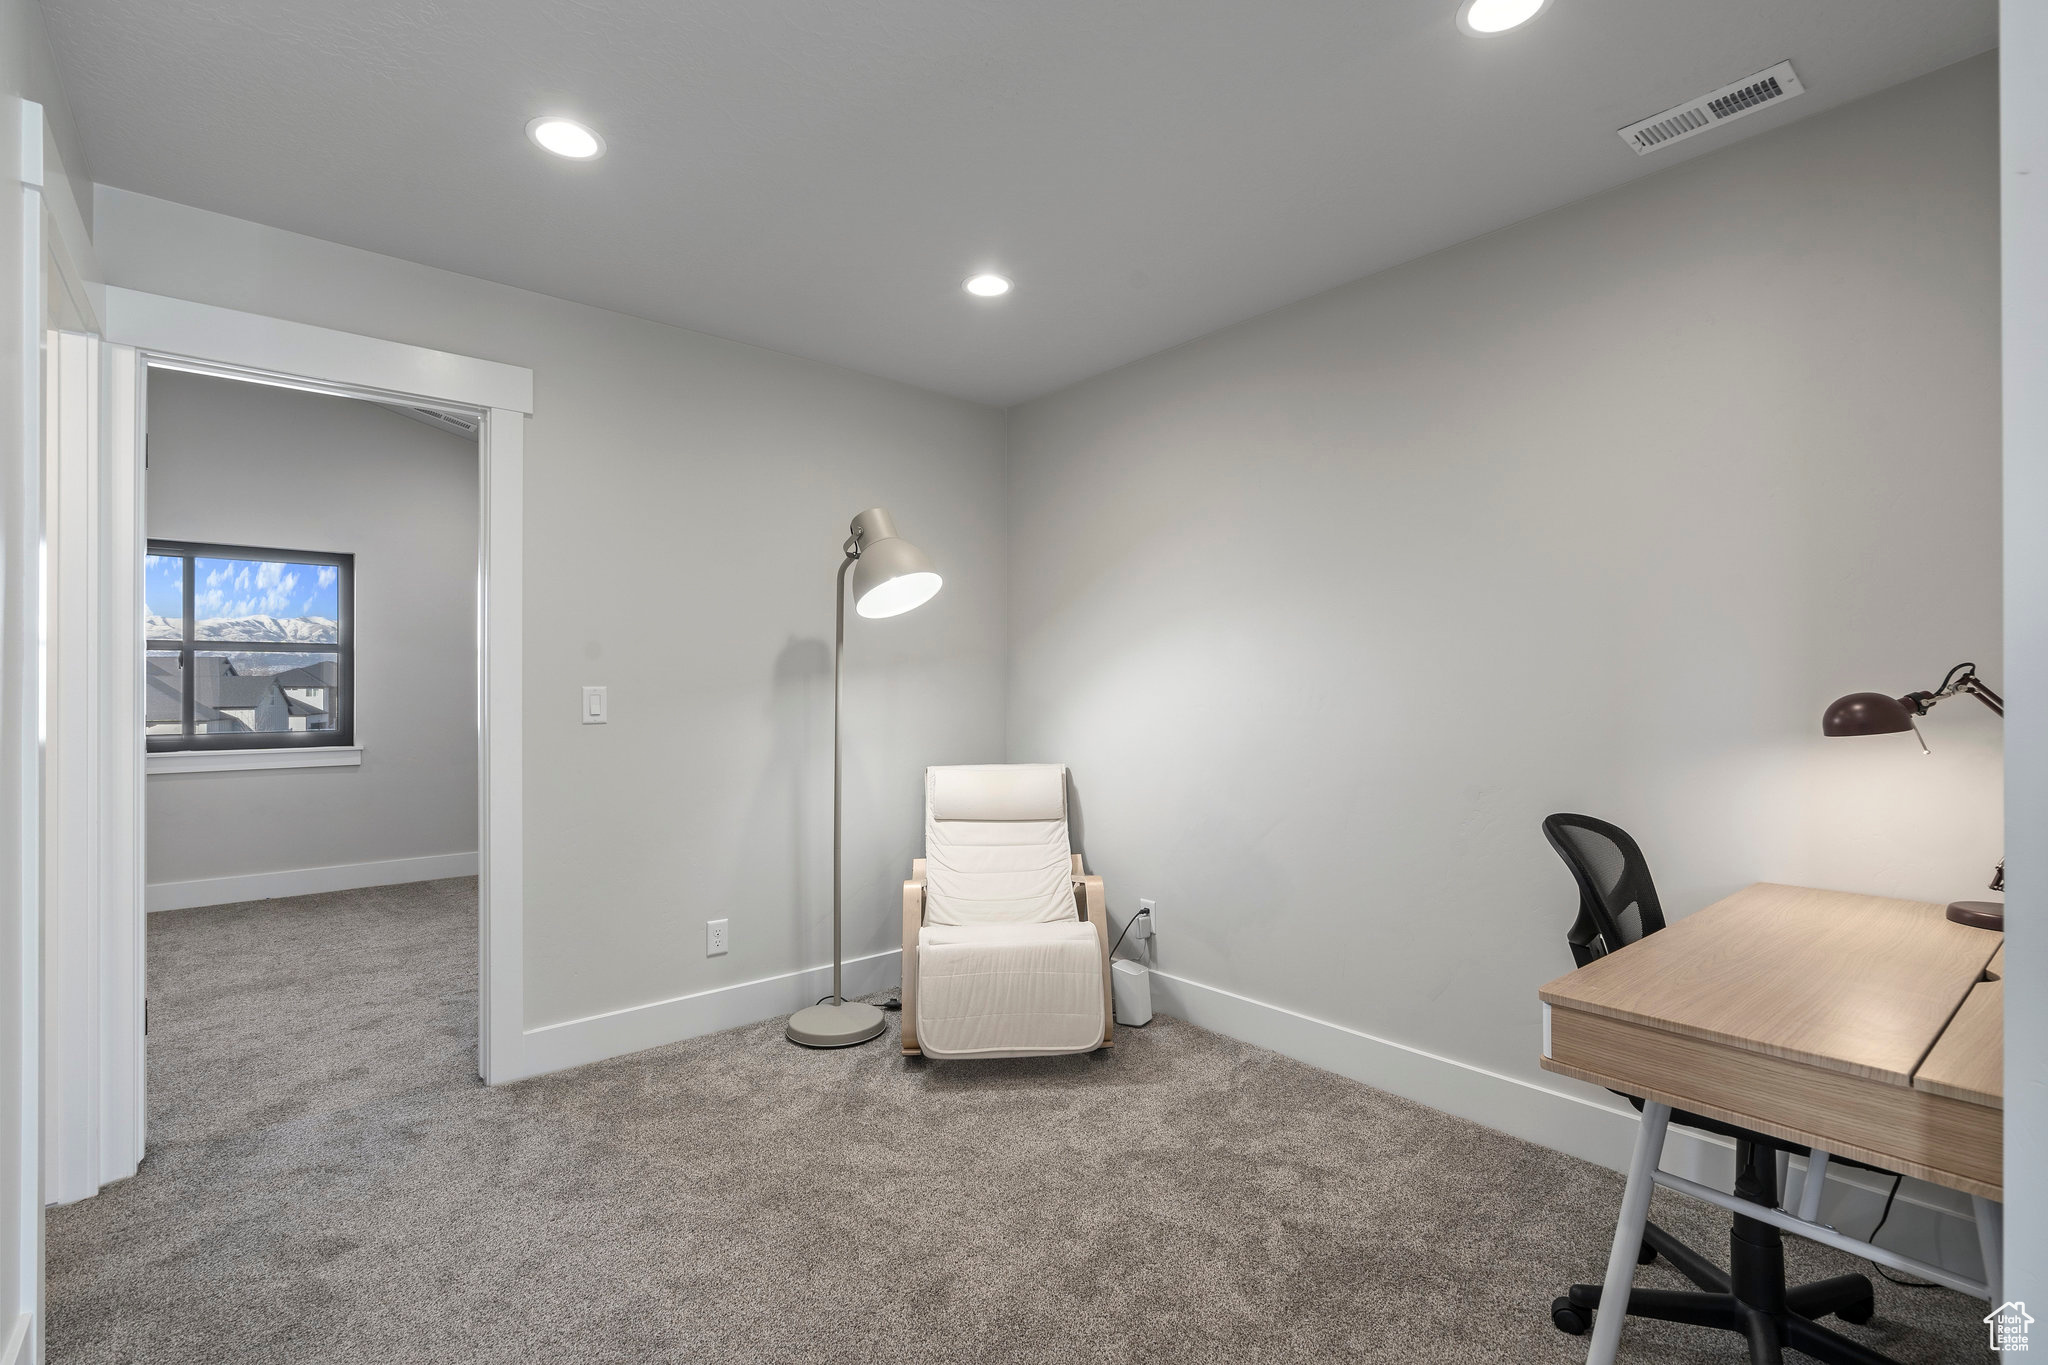 Home office featuring light colored carpet